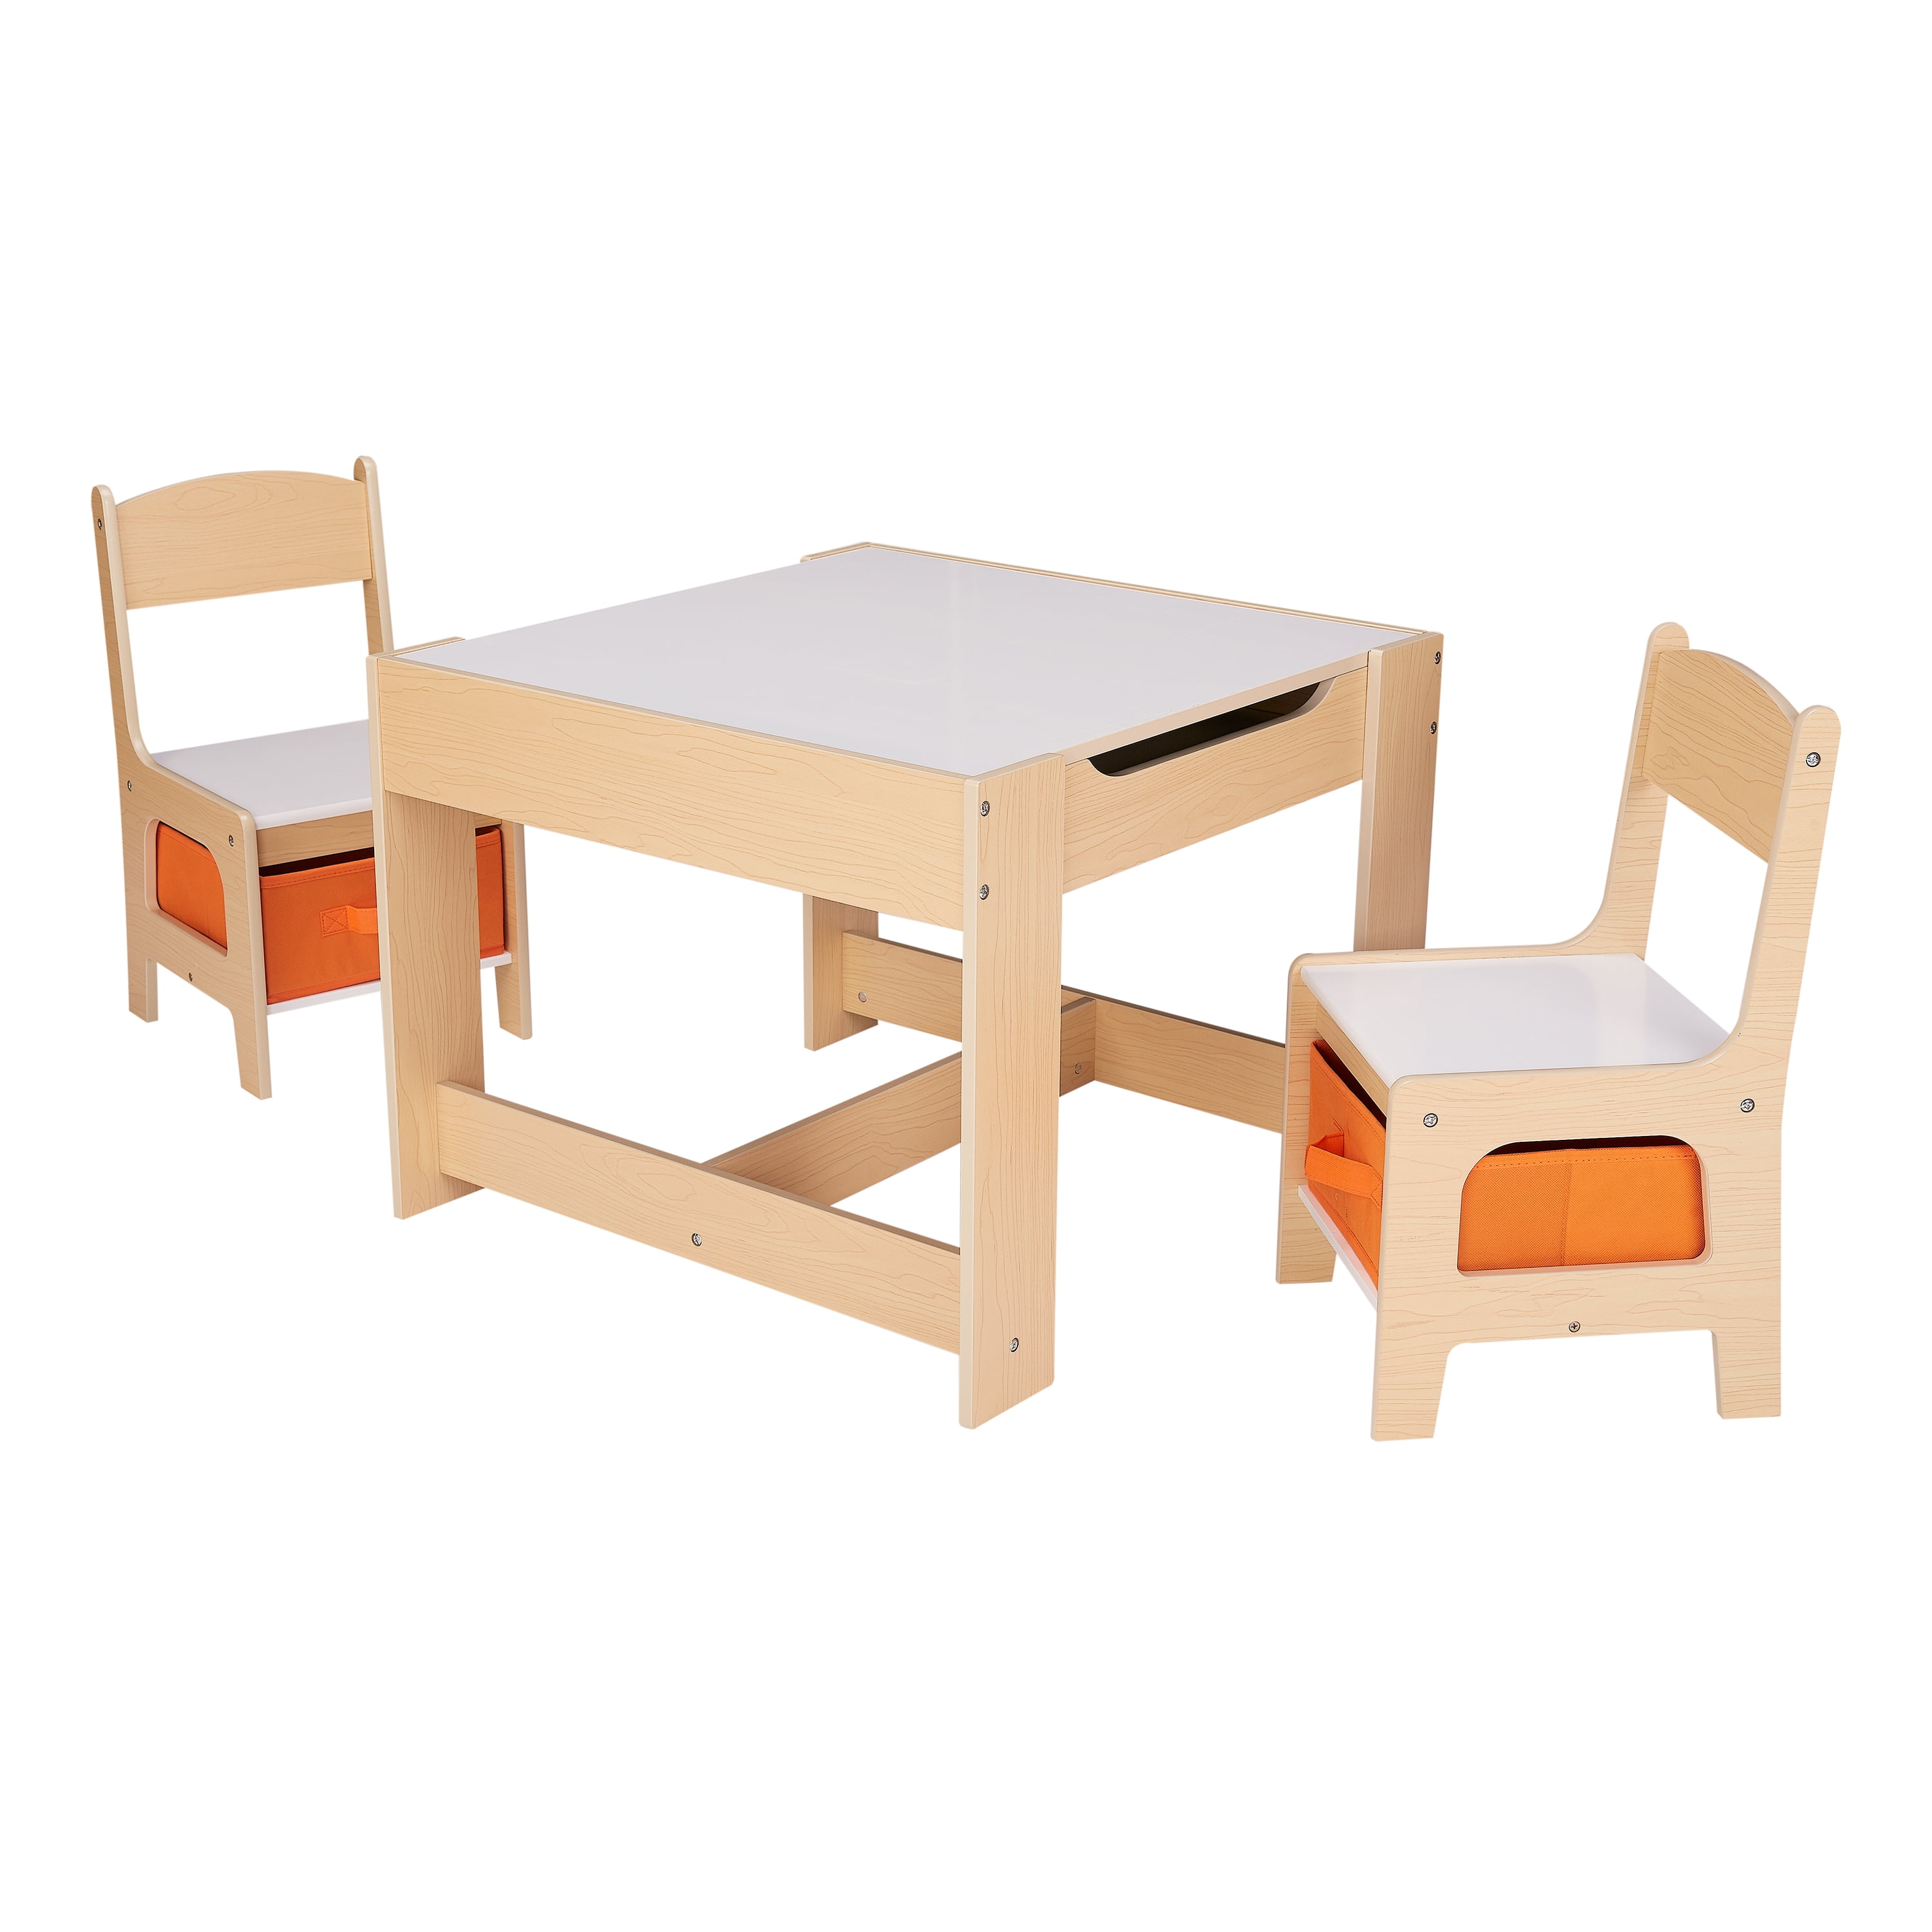 Tables & Chairs Set Natural Easy Melissa Doug Great Food Play Time Furniture 